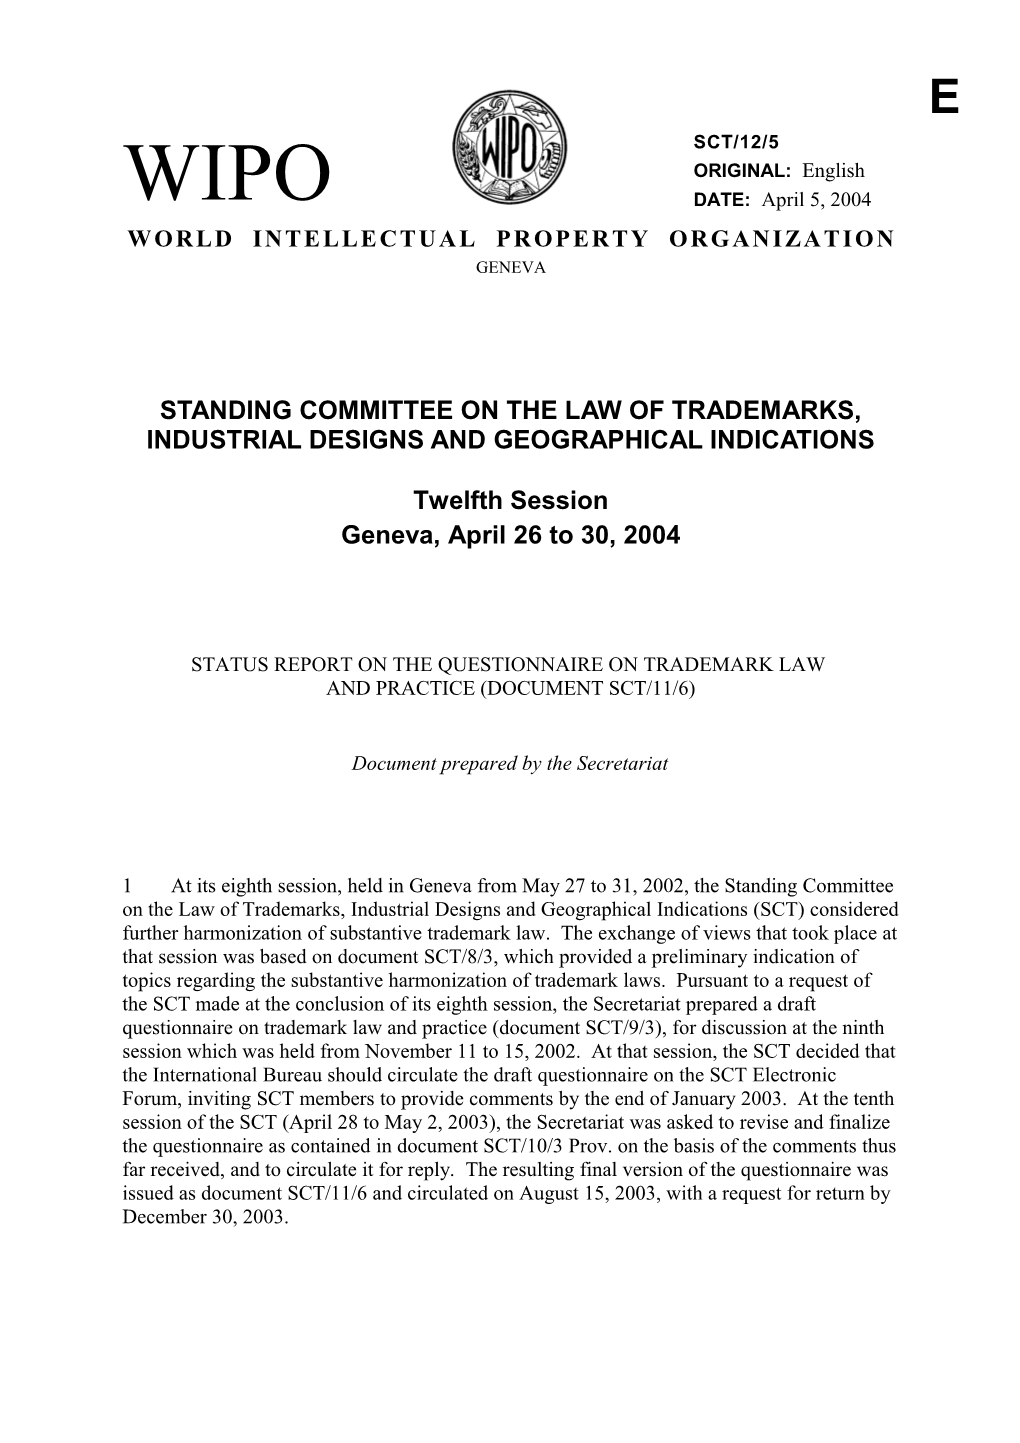 SCT/12/5: Status Report on the Questionnaire on Trademark Law and Practice (Document SCT/11/6)